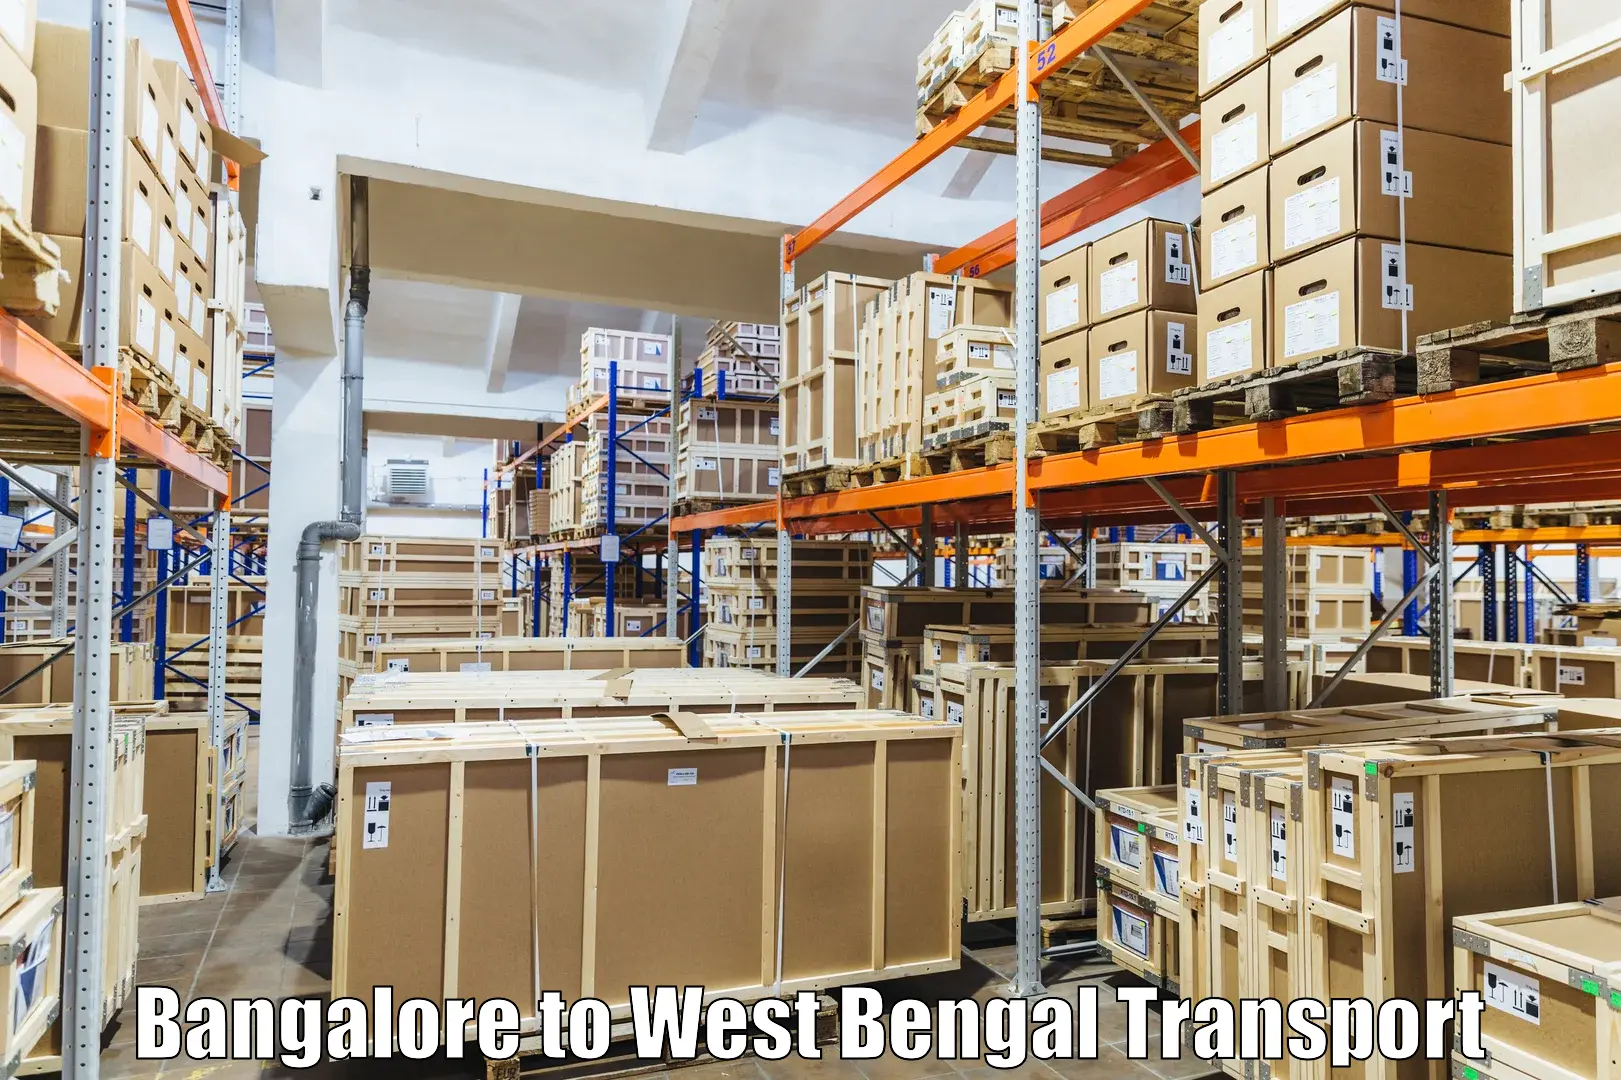 Daily parcel service transport in Bangalore to Bagdogra